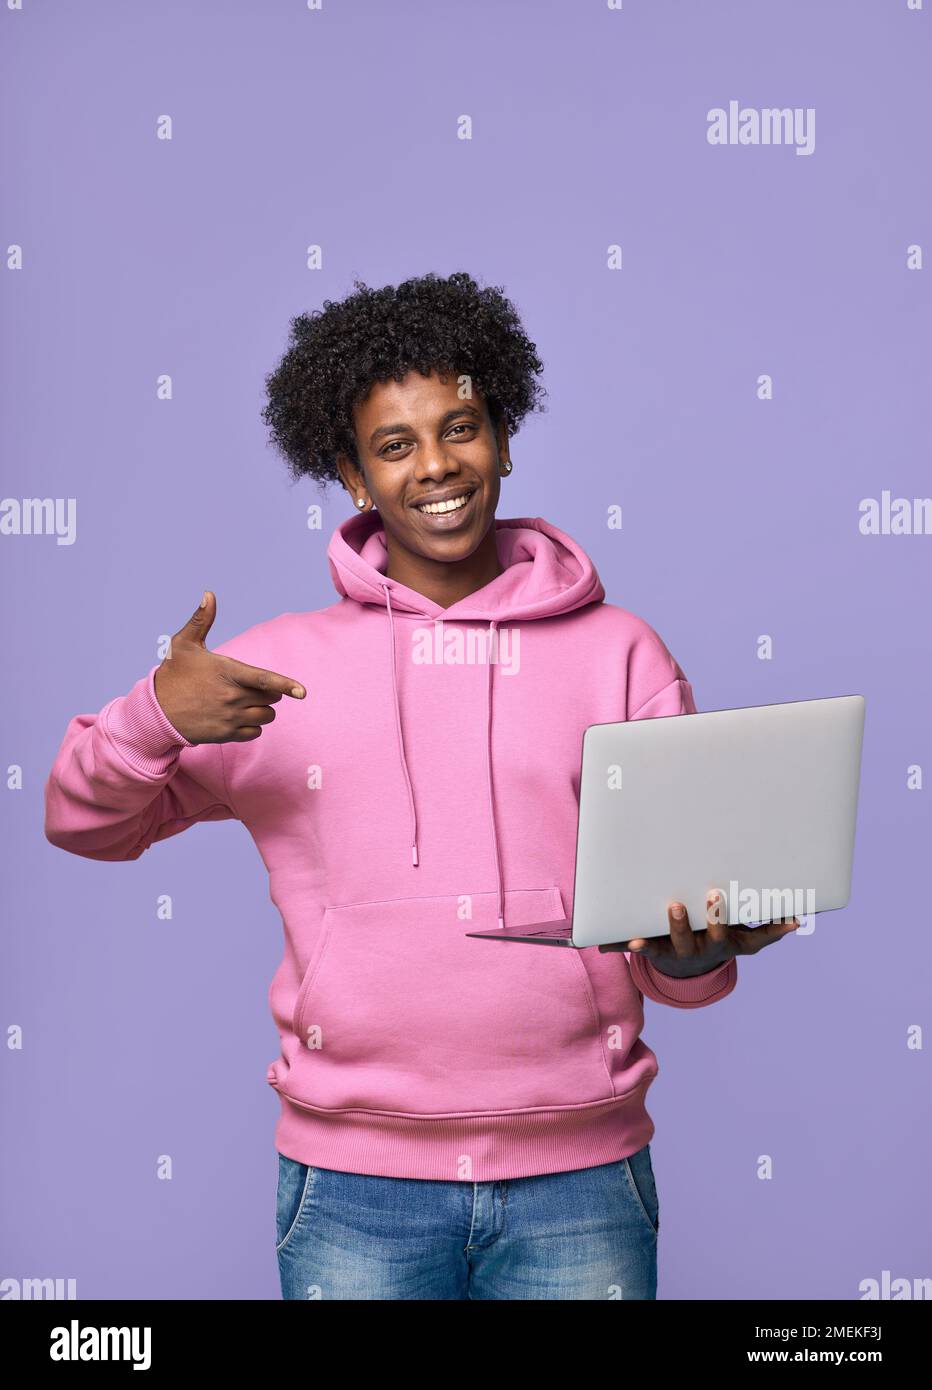 Happy African teen student holding pointing at laptop isolated on purple. Stock Photo